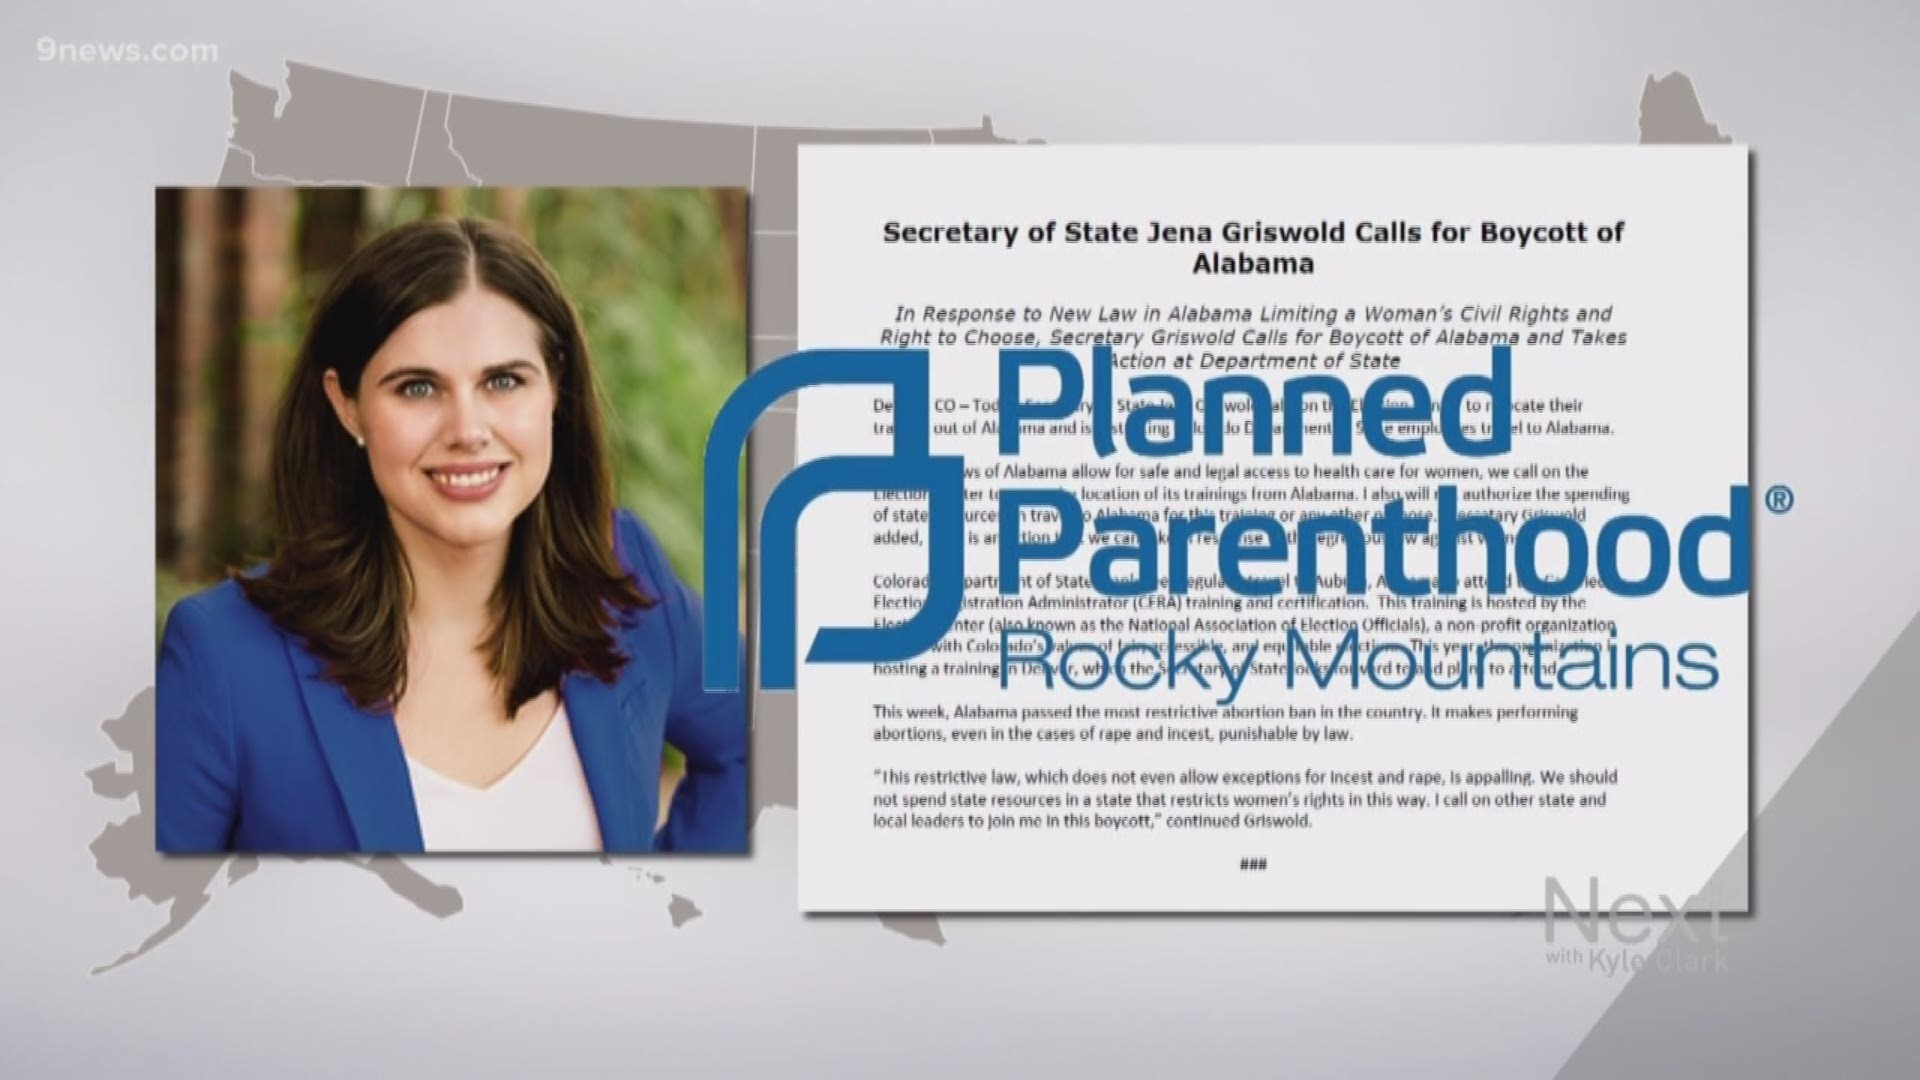 Colorado's Secretary of State Jena Griswold is fundraising off her call to boycott Alabama over it's abortion ban.